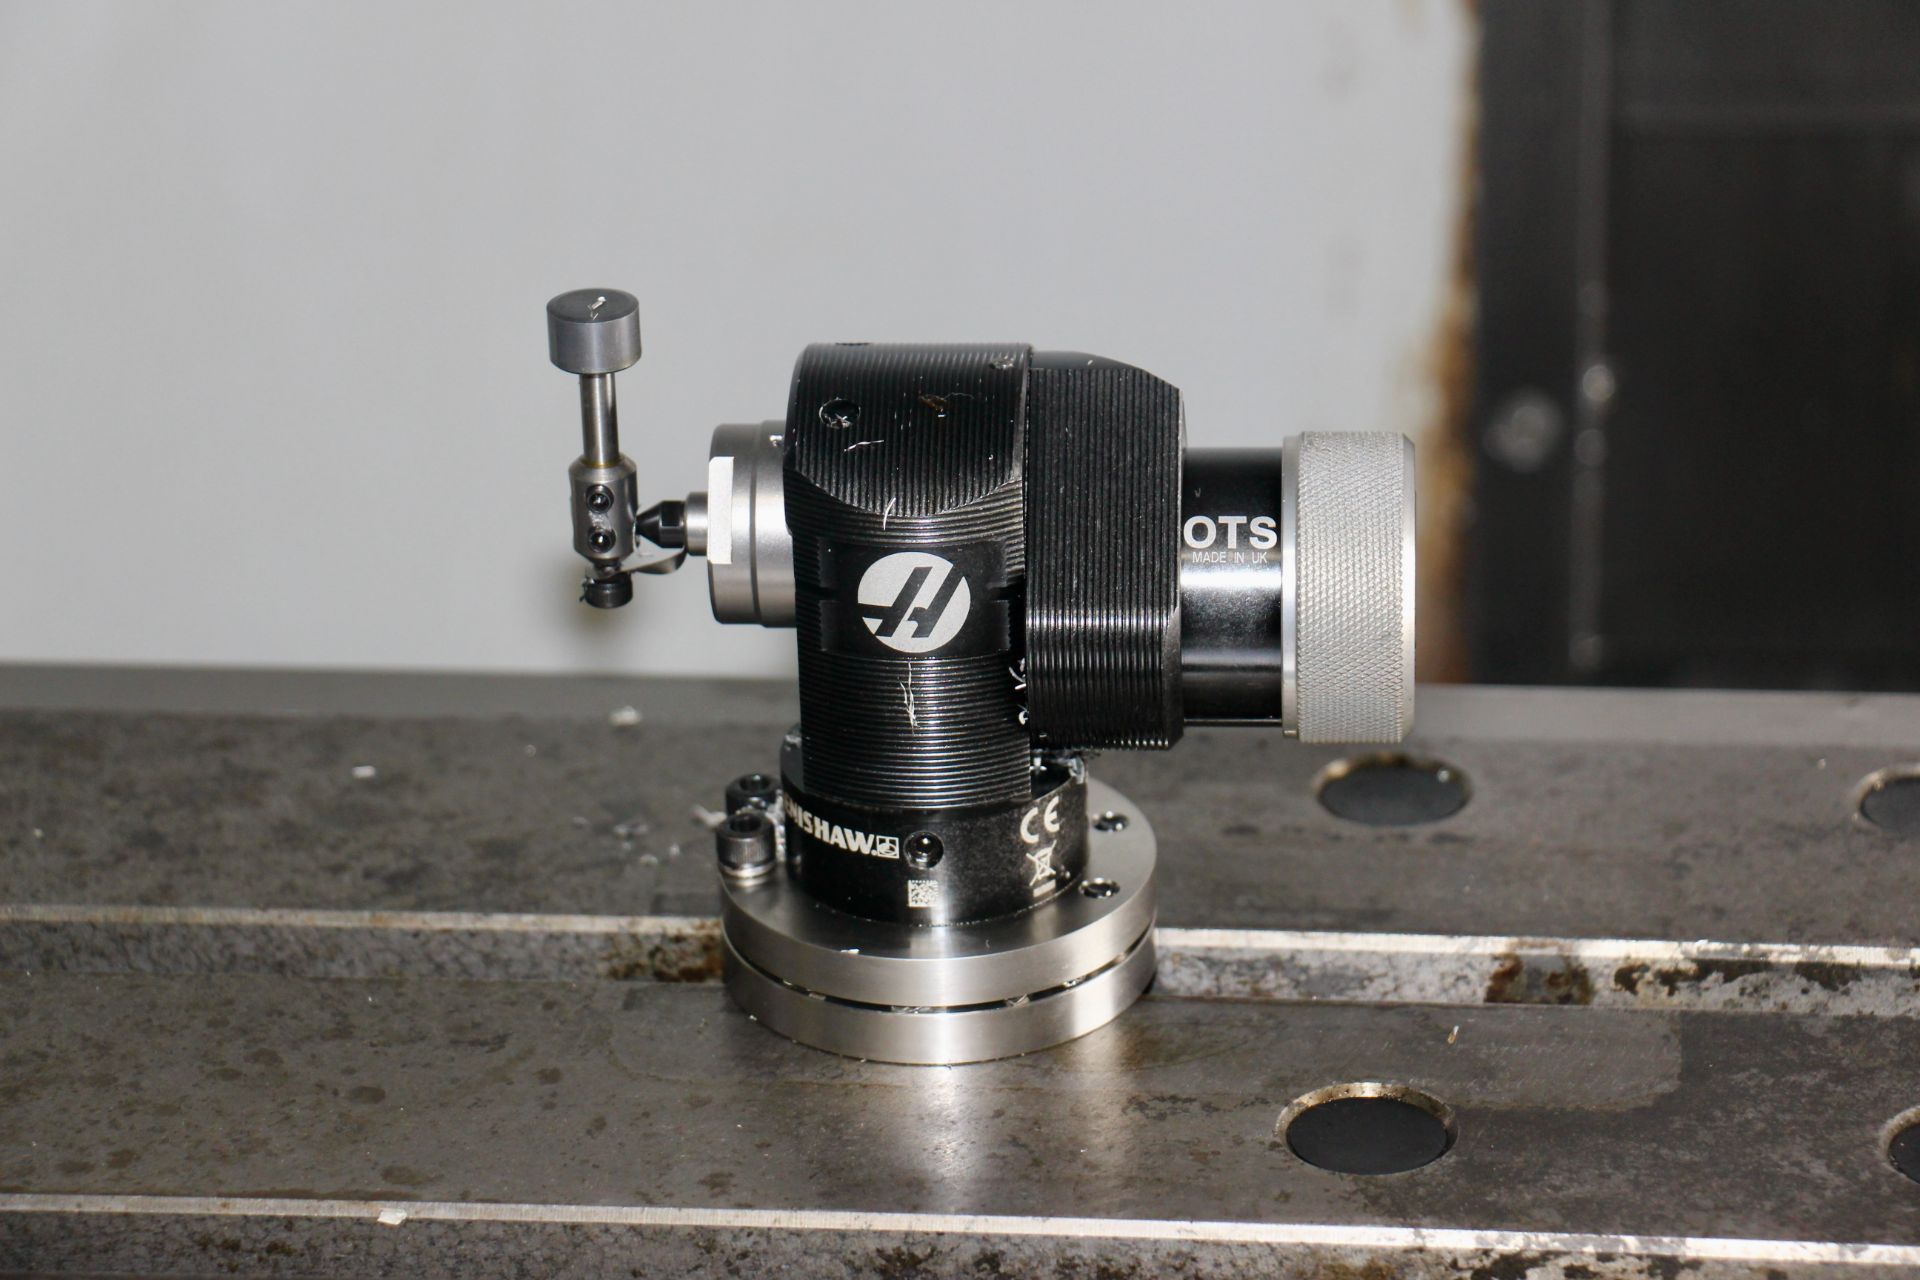 2012 HAAS VF-3 SN 1100115 - 40 POCKET SIDE MOUNT TC, WIRELESS PROBING (WIPS), THRU SPINDLE - Image 3 of 24